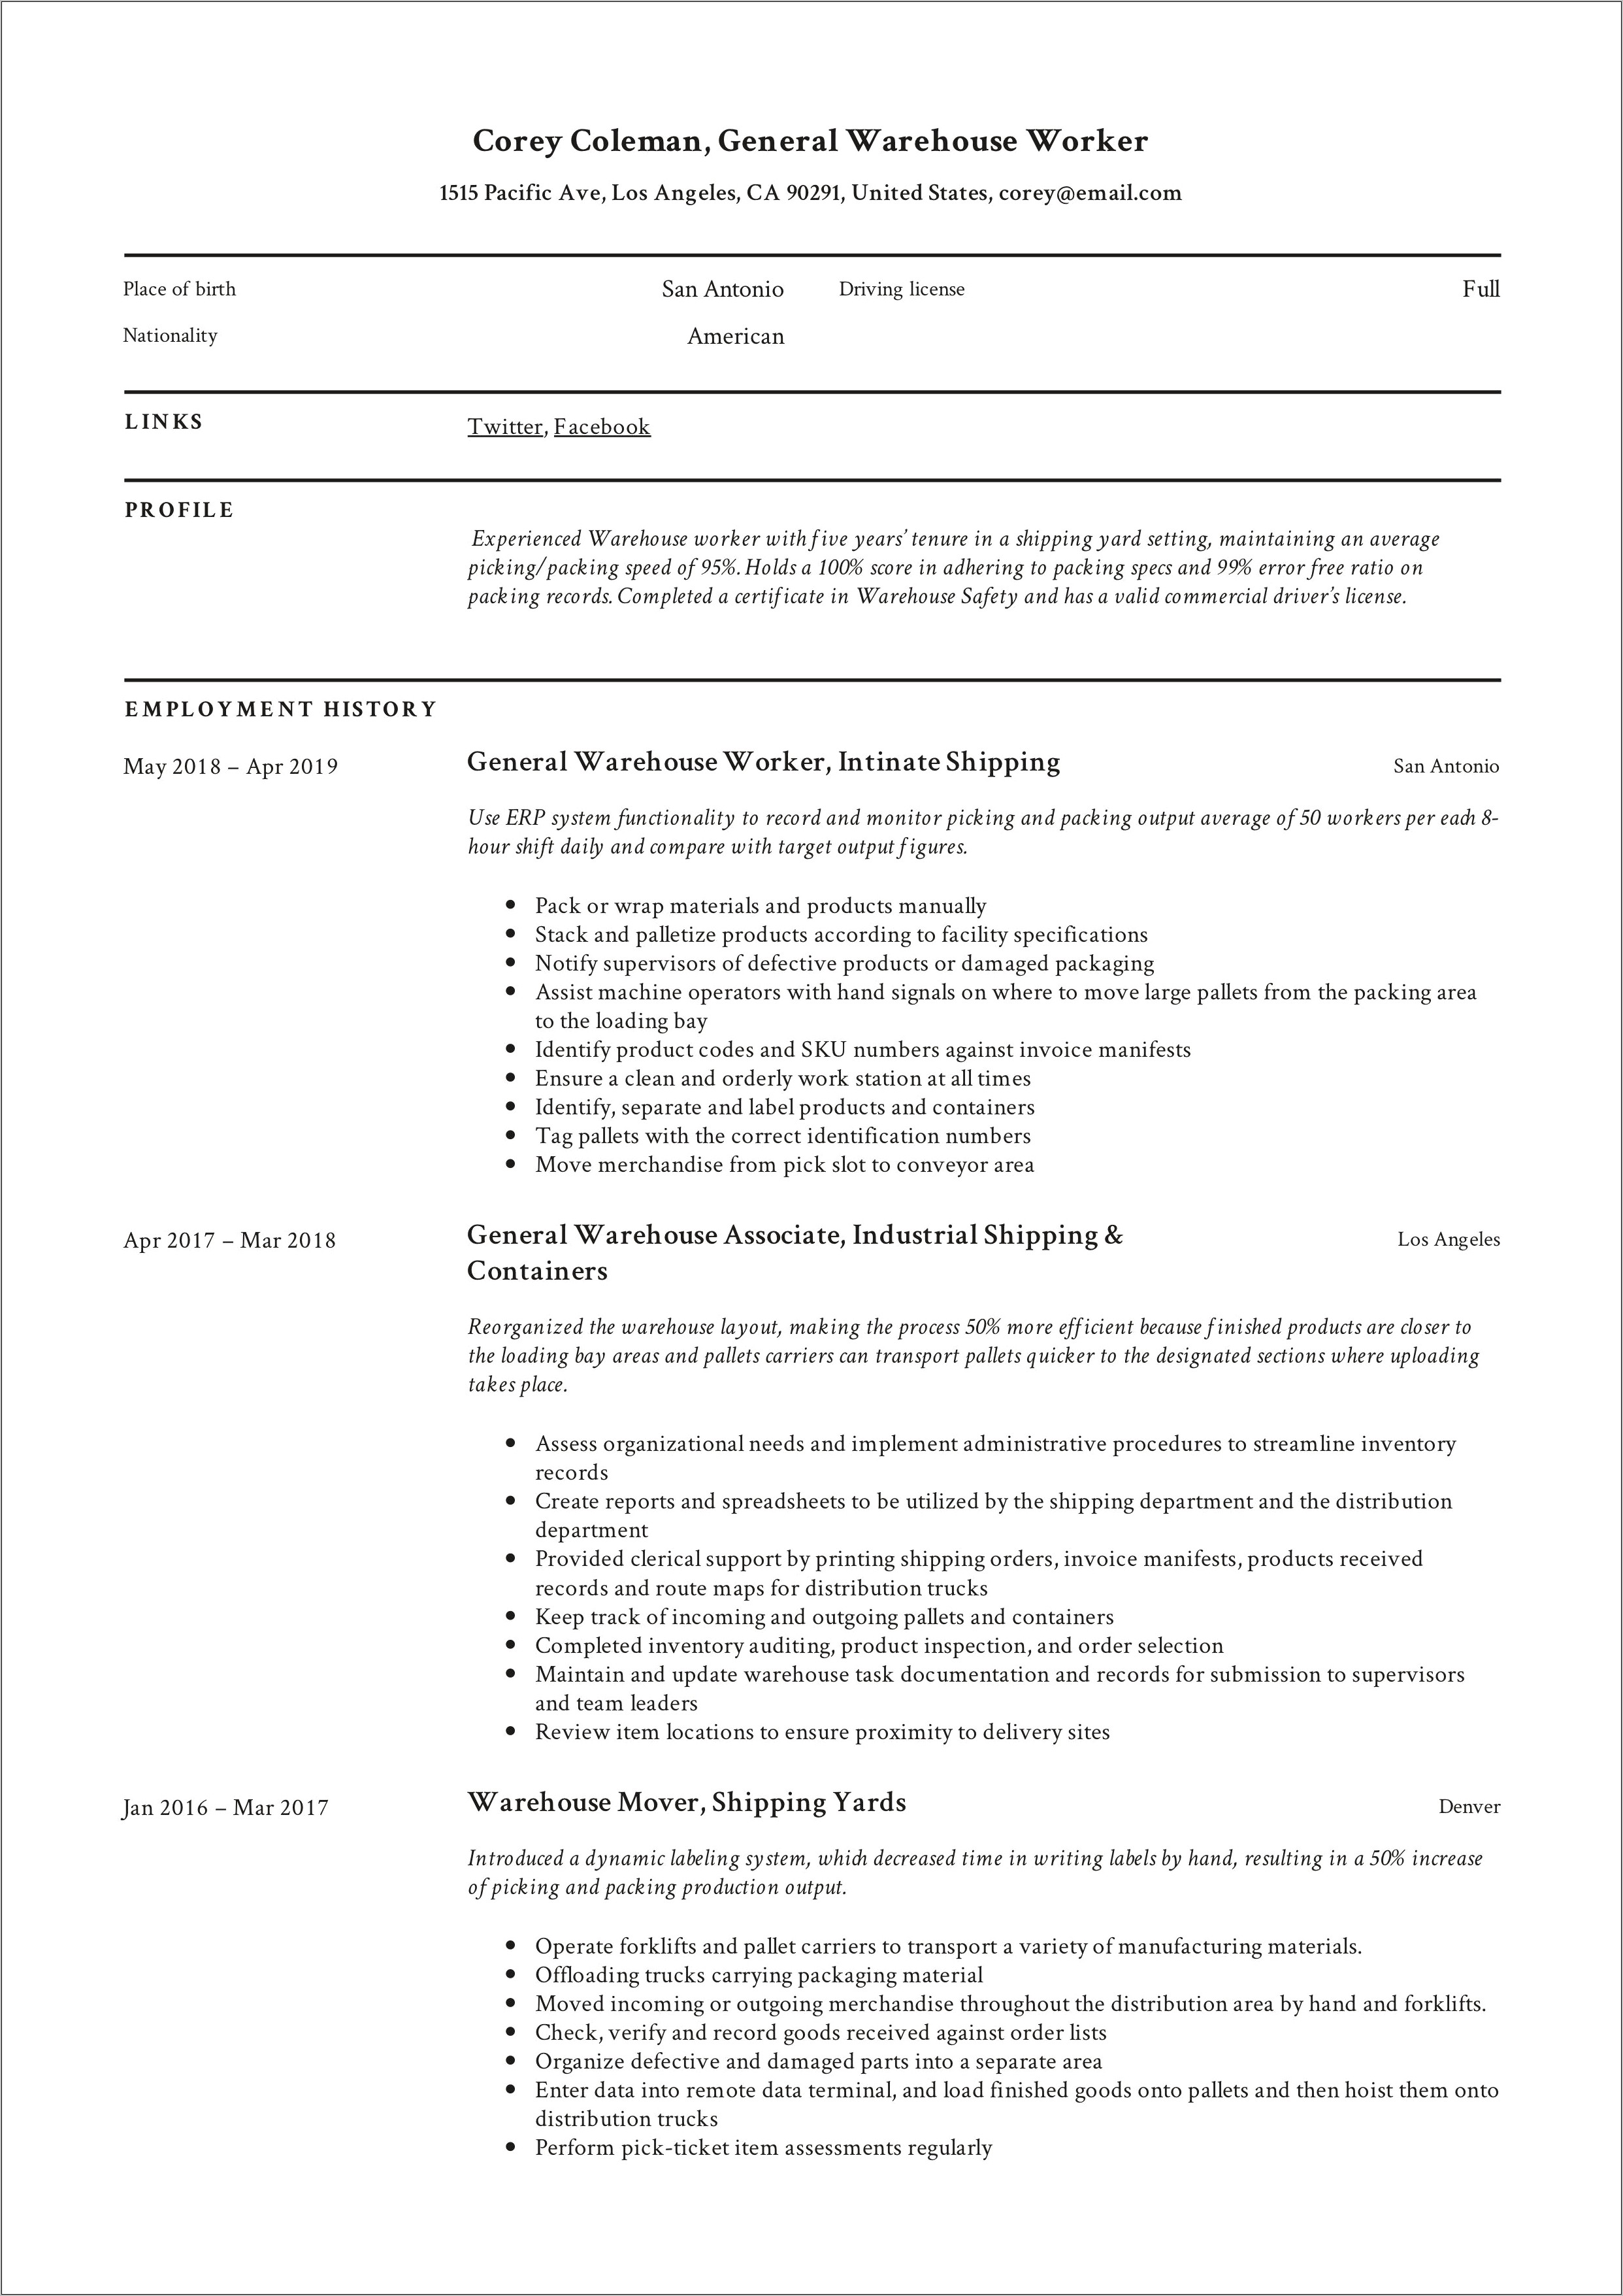 Sample Professional Summary For Resume For Warehouse Associate